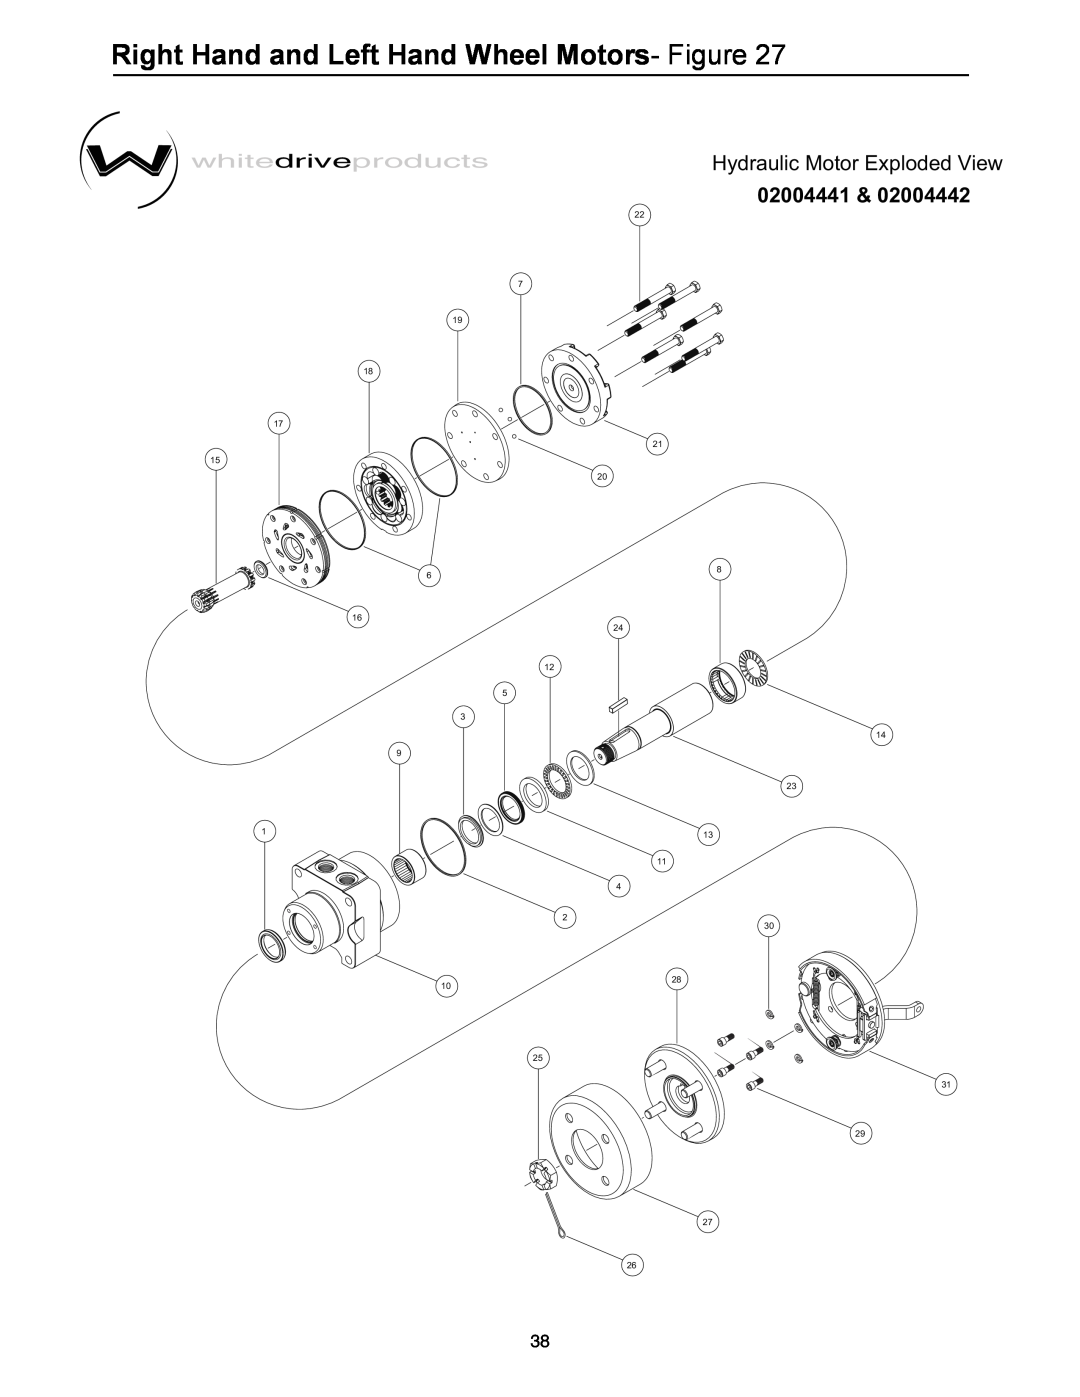 Cub Cadet 53AI8CT8050 manual Right Hand and Left Hand Wheel Motors- Figure, Hydraulic Motor Exploded View, 02004441 